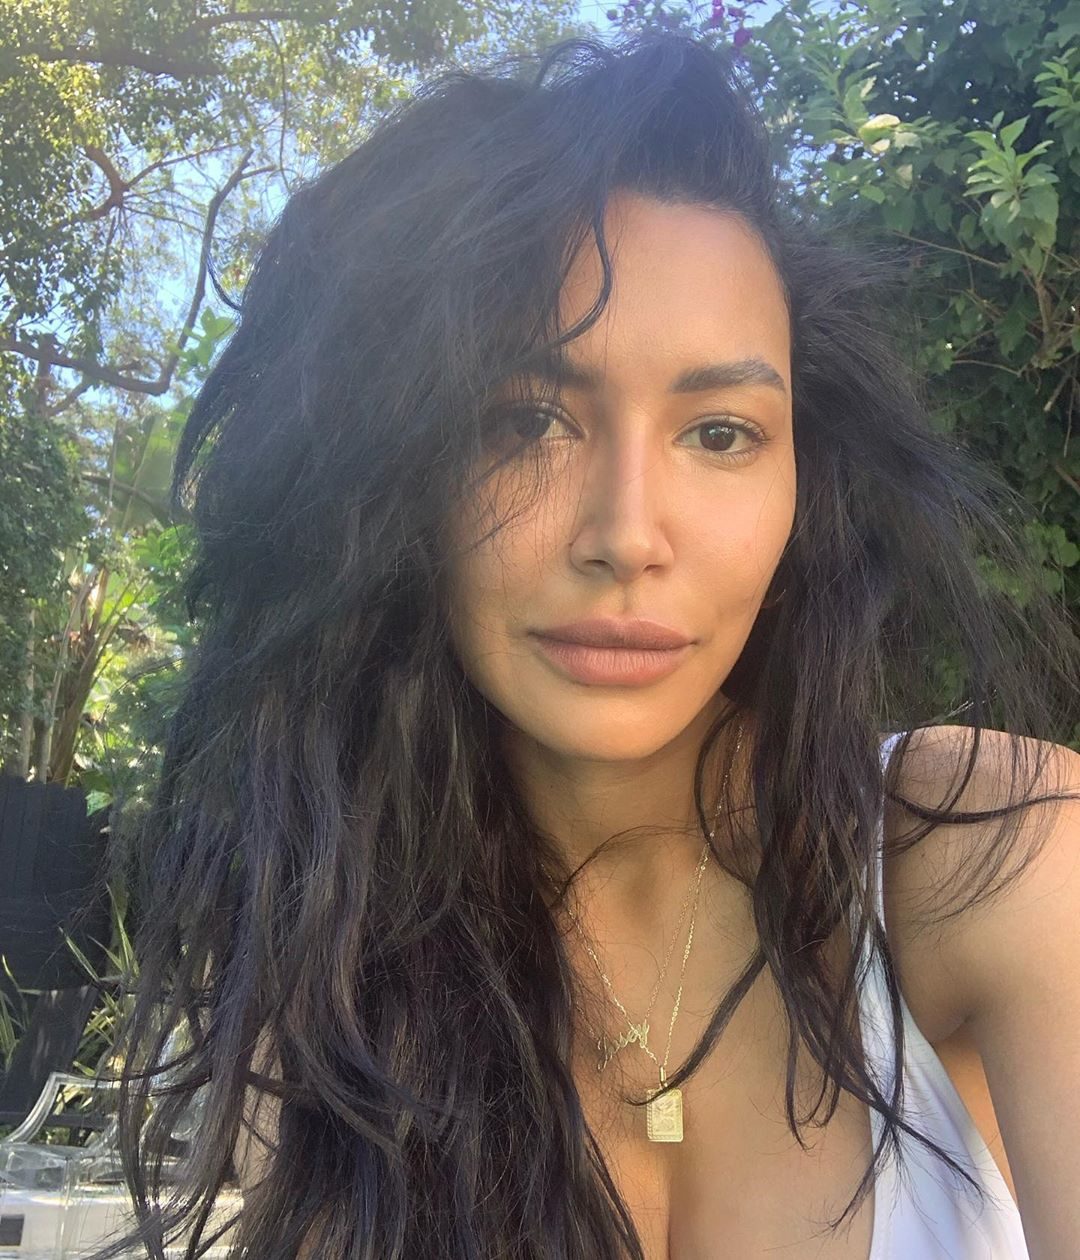 Investigation reveals Naya Rivera called for help before drowning